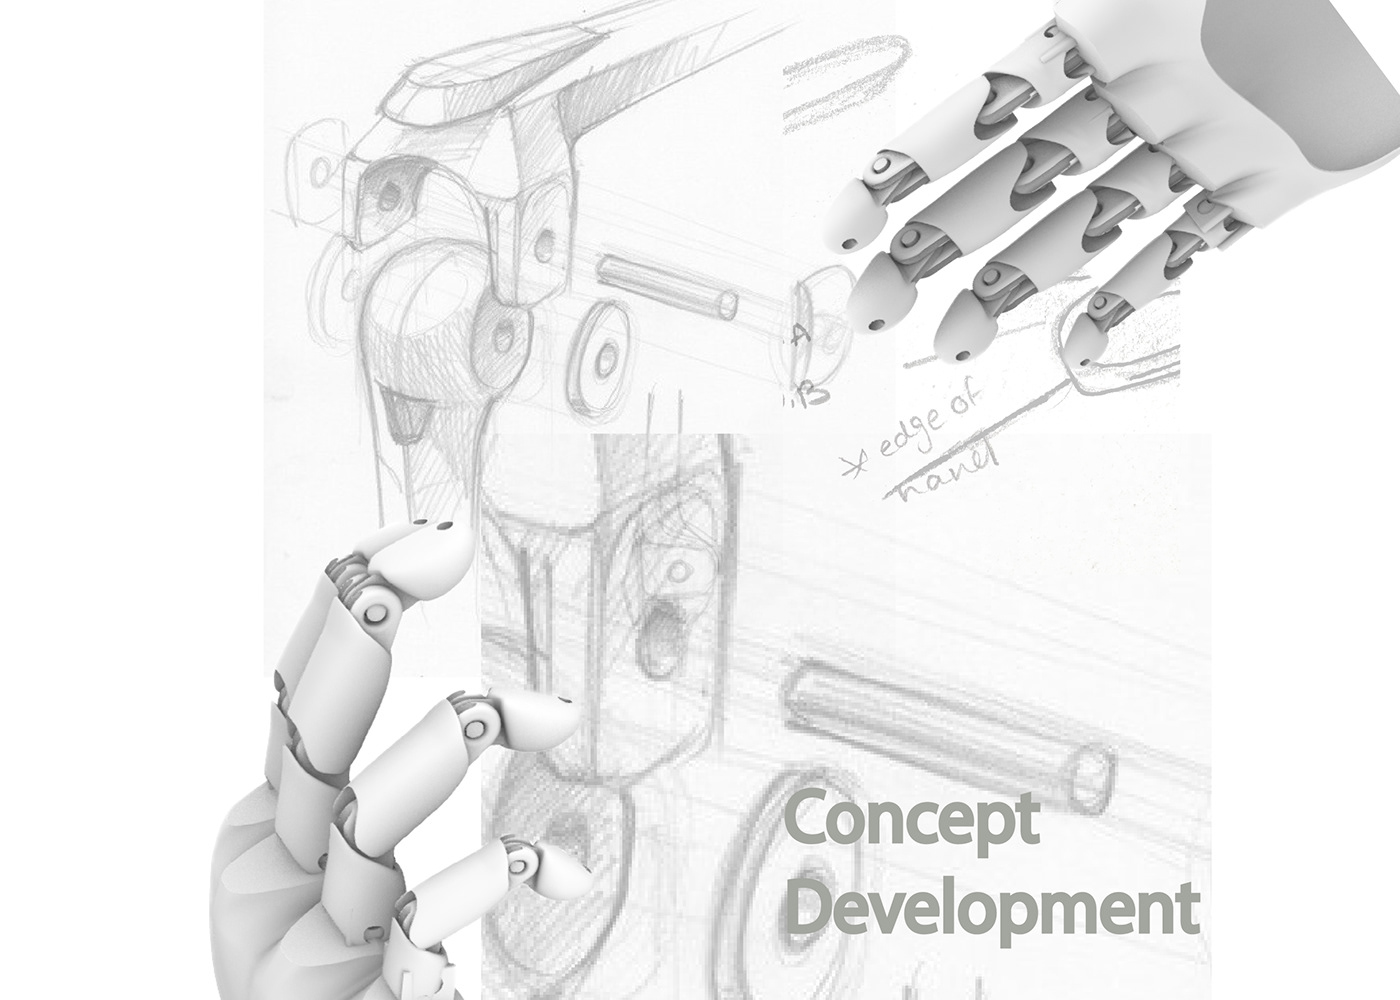 prosthetics hand customizable 3d printing 3d design modelling amputee user experience mechanical